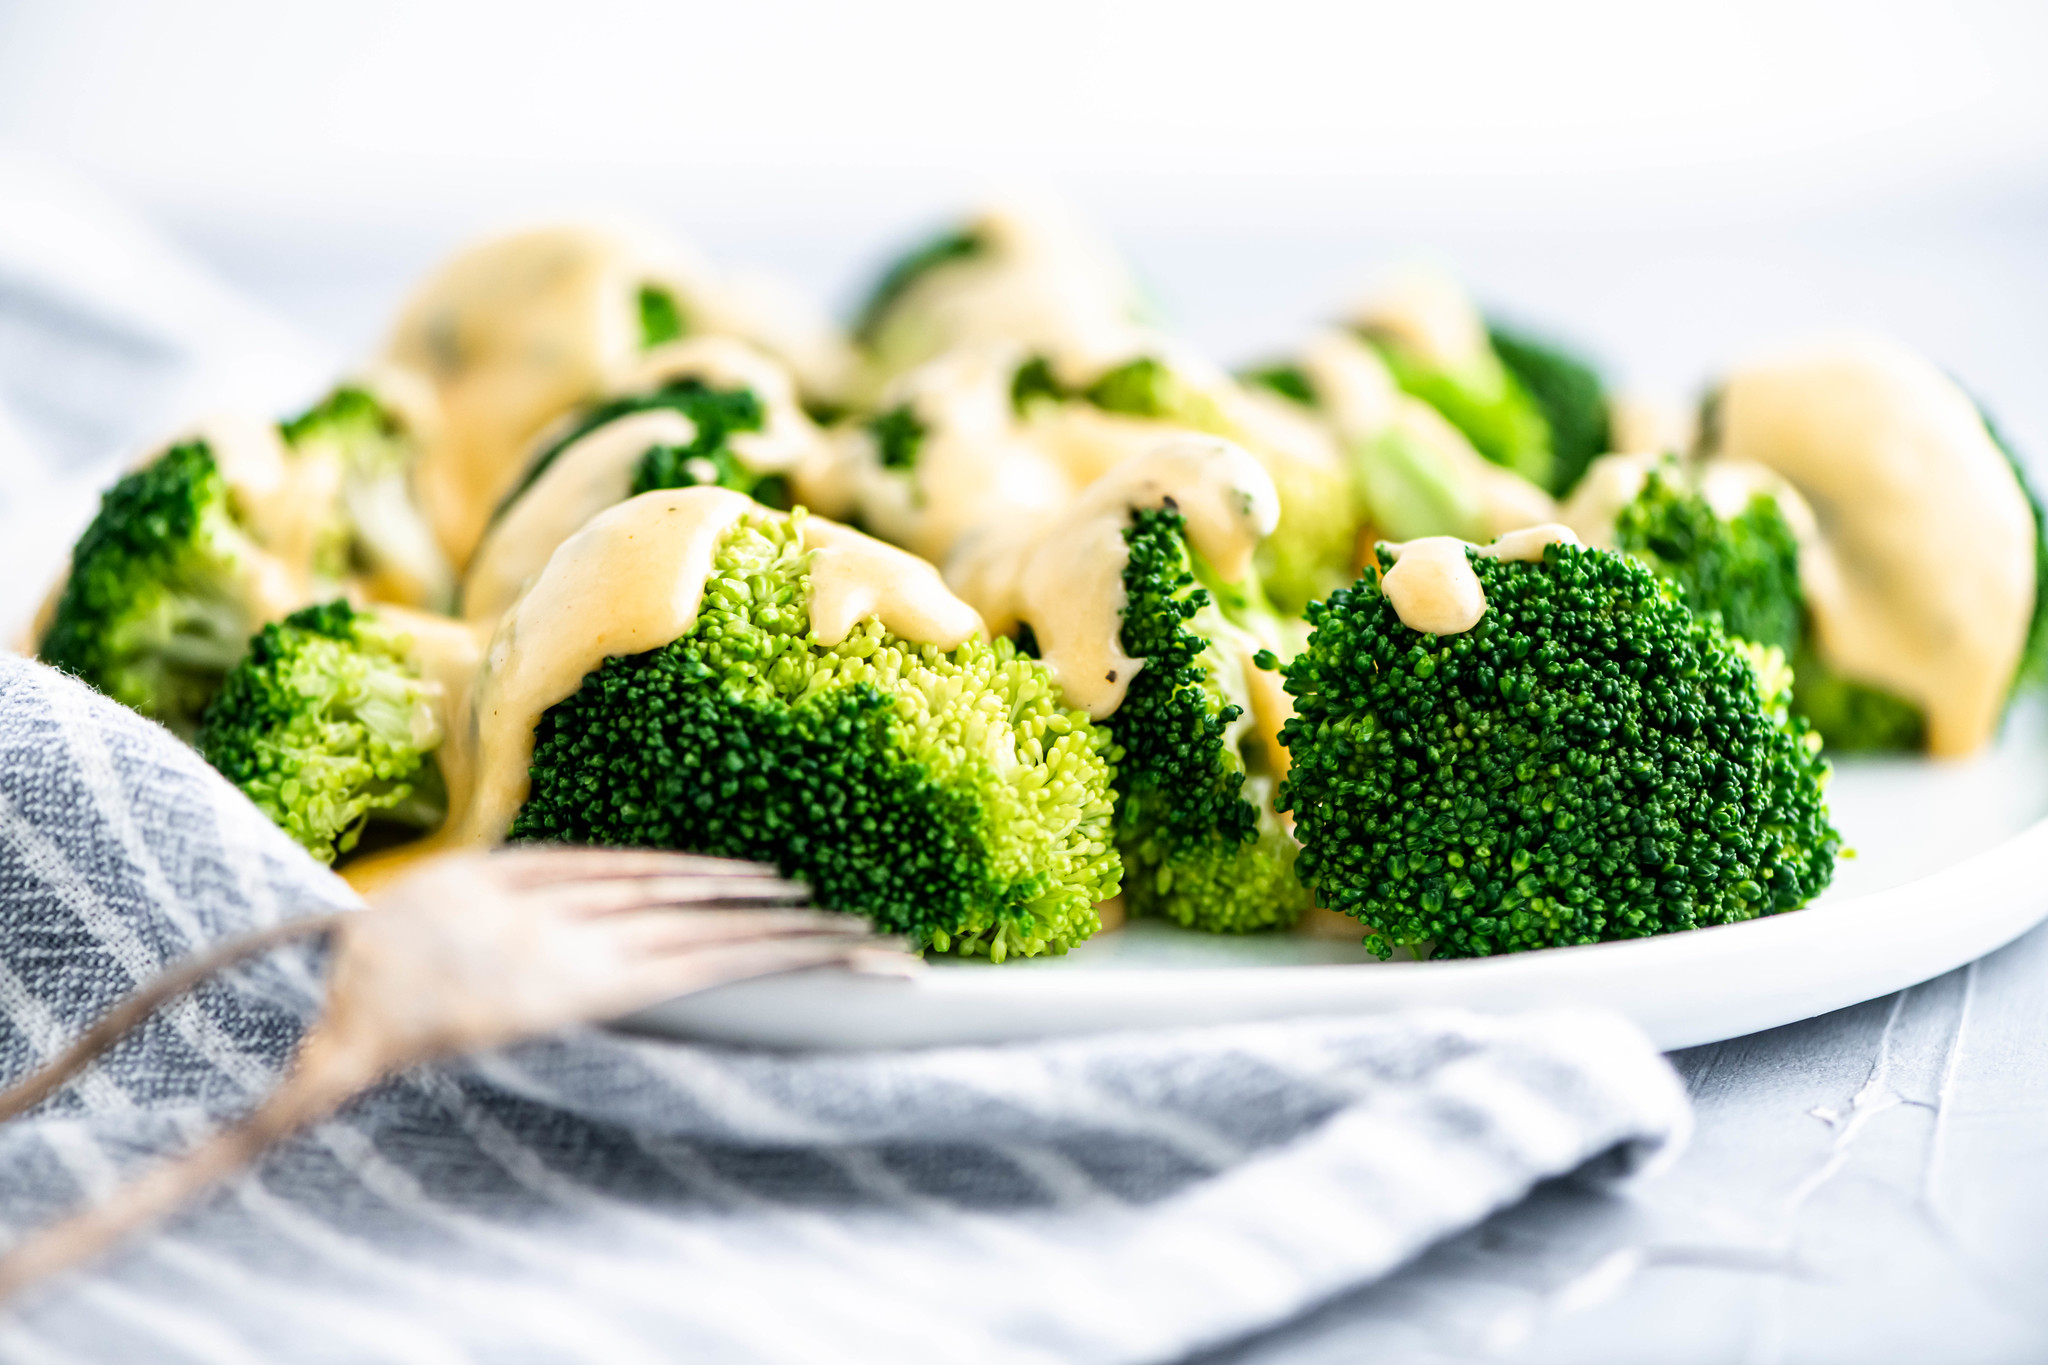 Fresh steamed broccoli with cheese sauce.